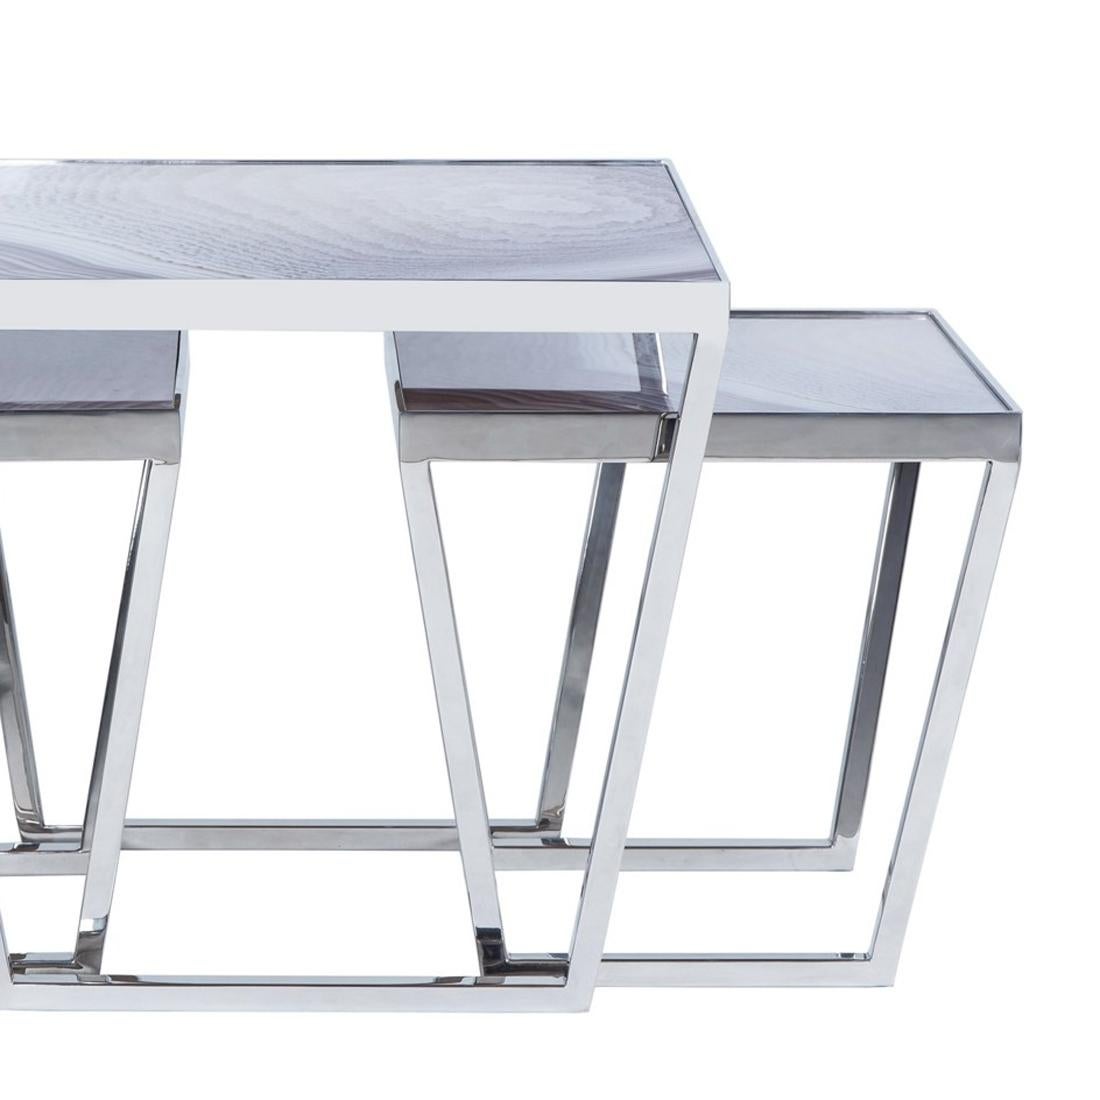 Hand-Crafted Printed Glass Set of 3 Coffee Tables